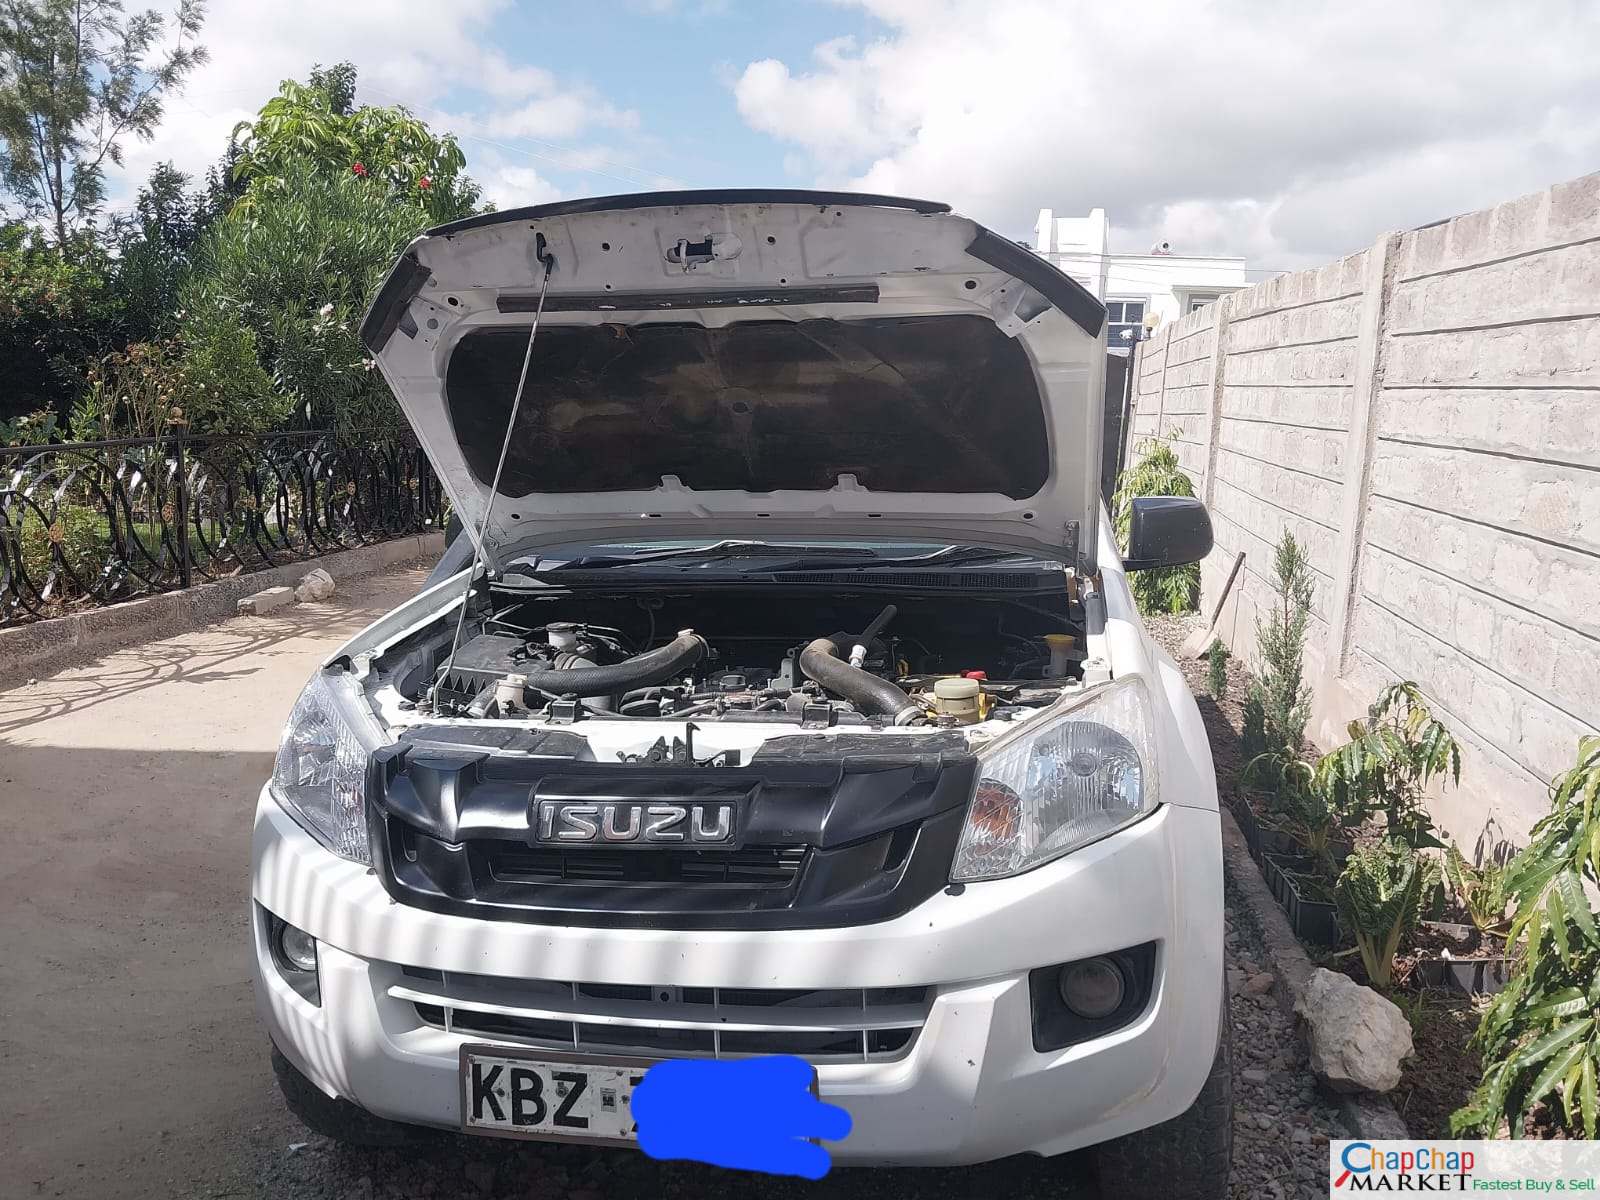 Isuzu D-max DMAX local assembly CHEAPEST YOU PAY 40% DEPOSIT Exclusive